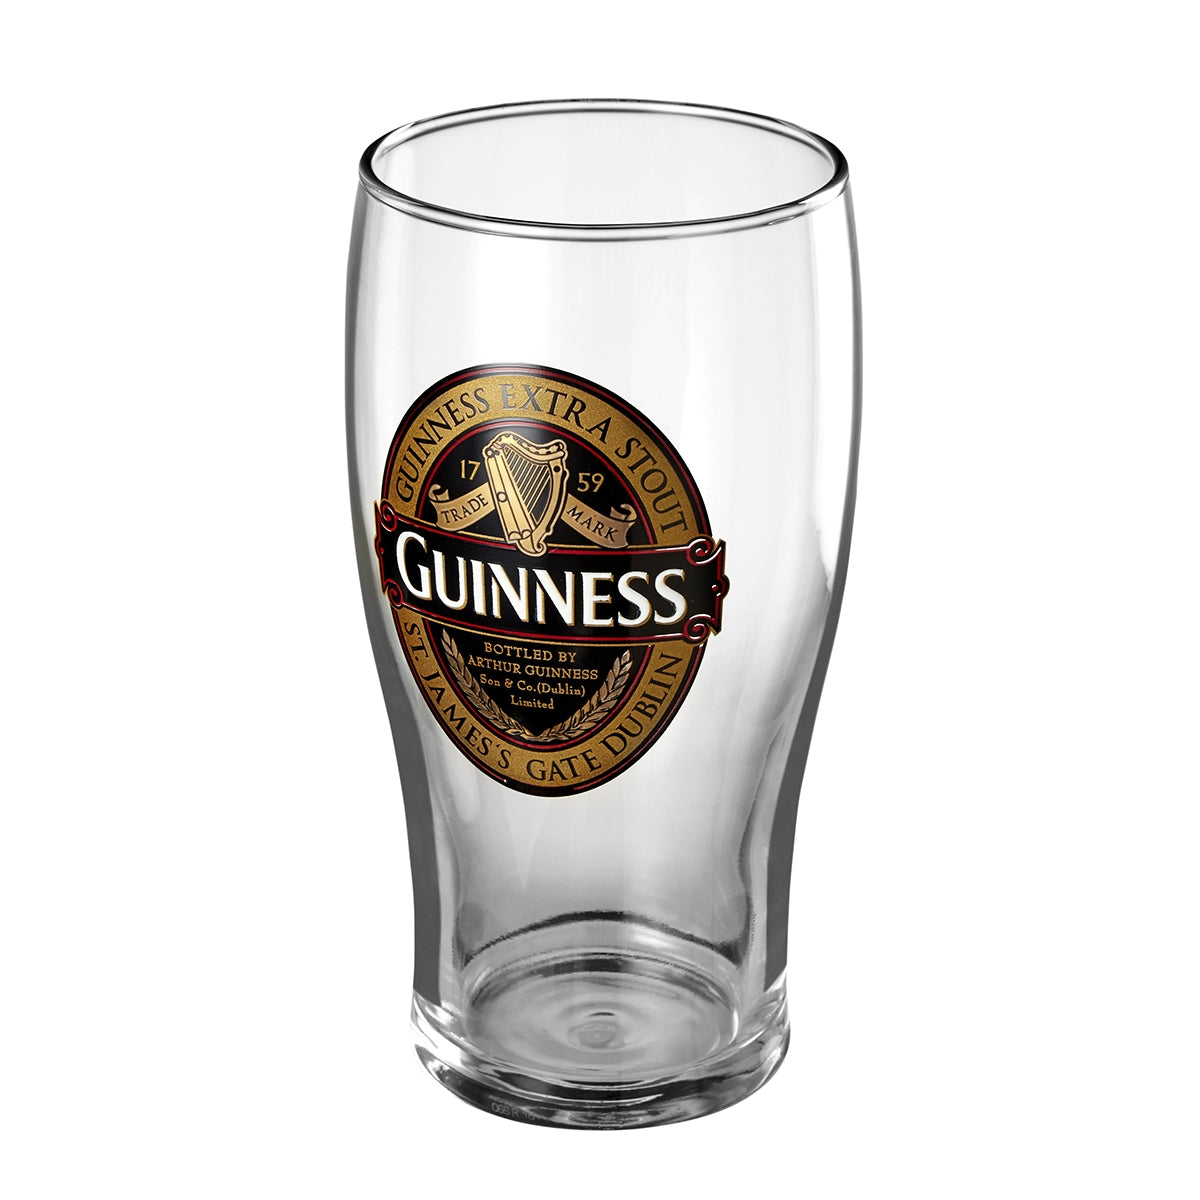 Guinness UK Guinness Classic Collection Pint Glass - 6 Pack.